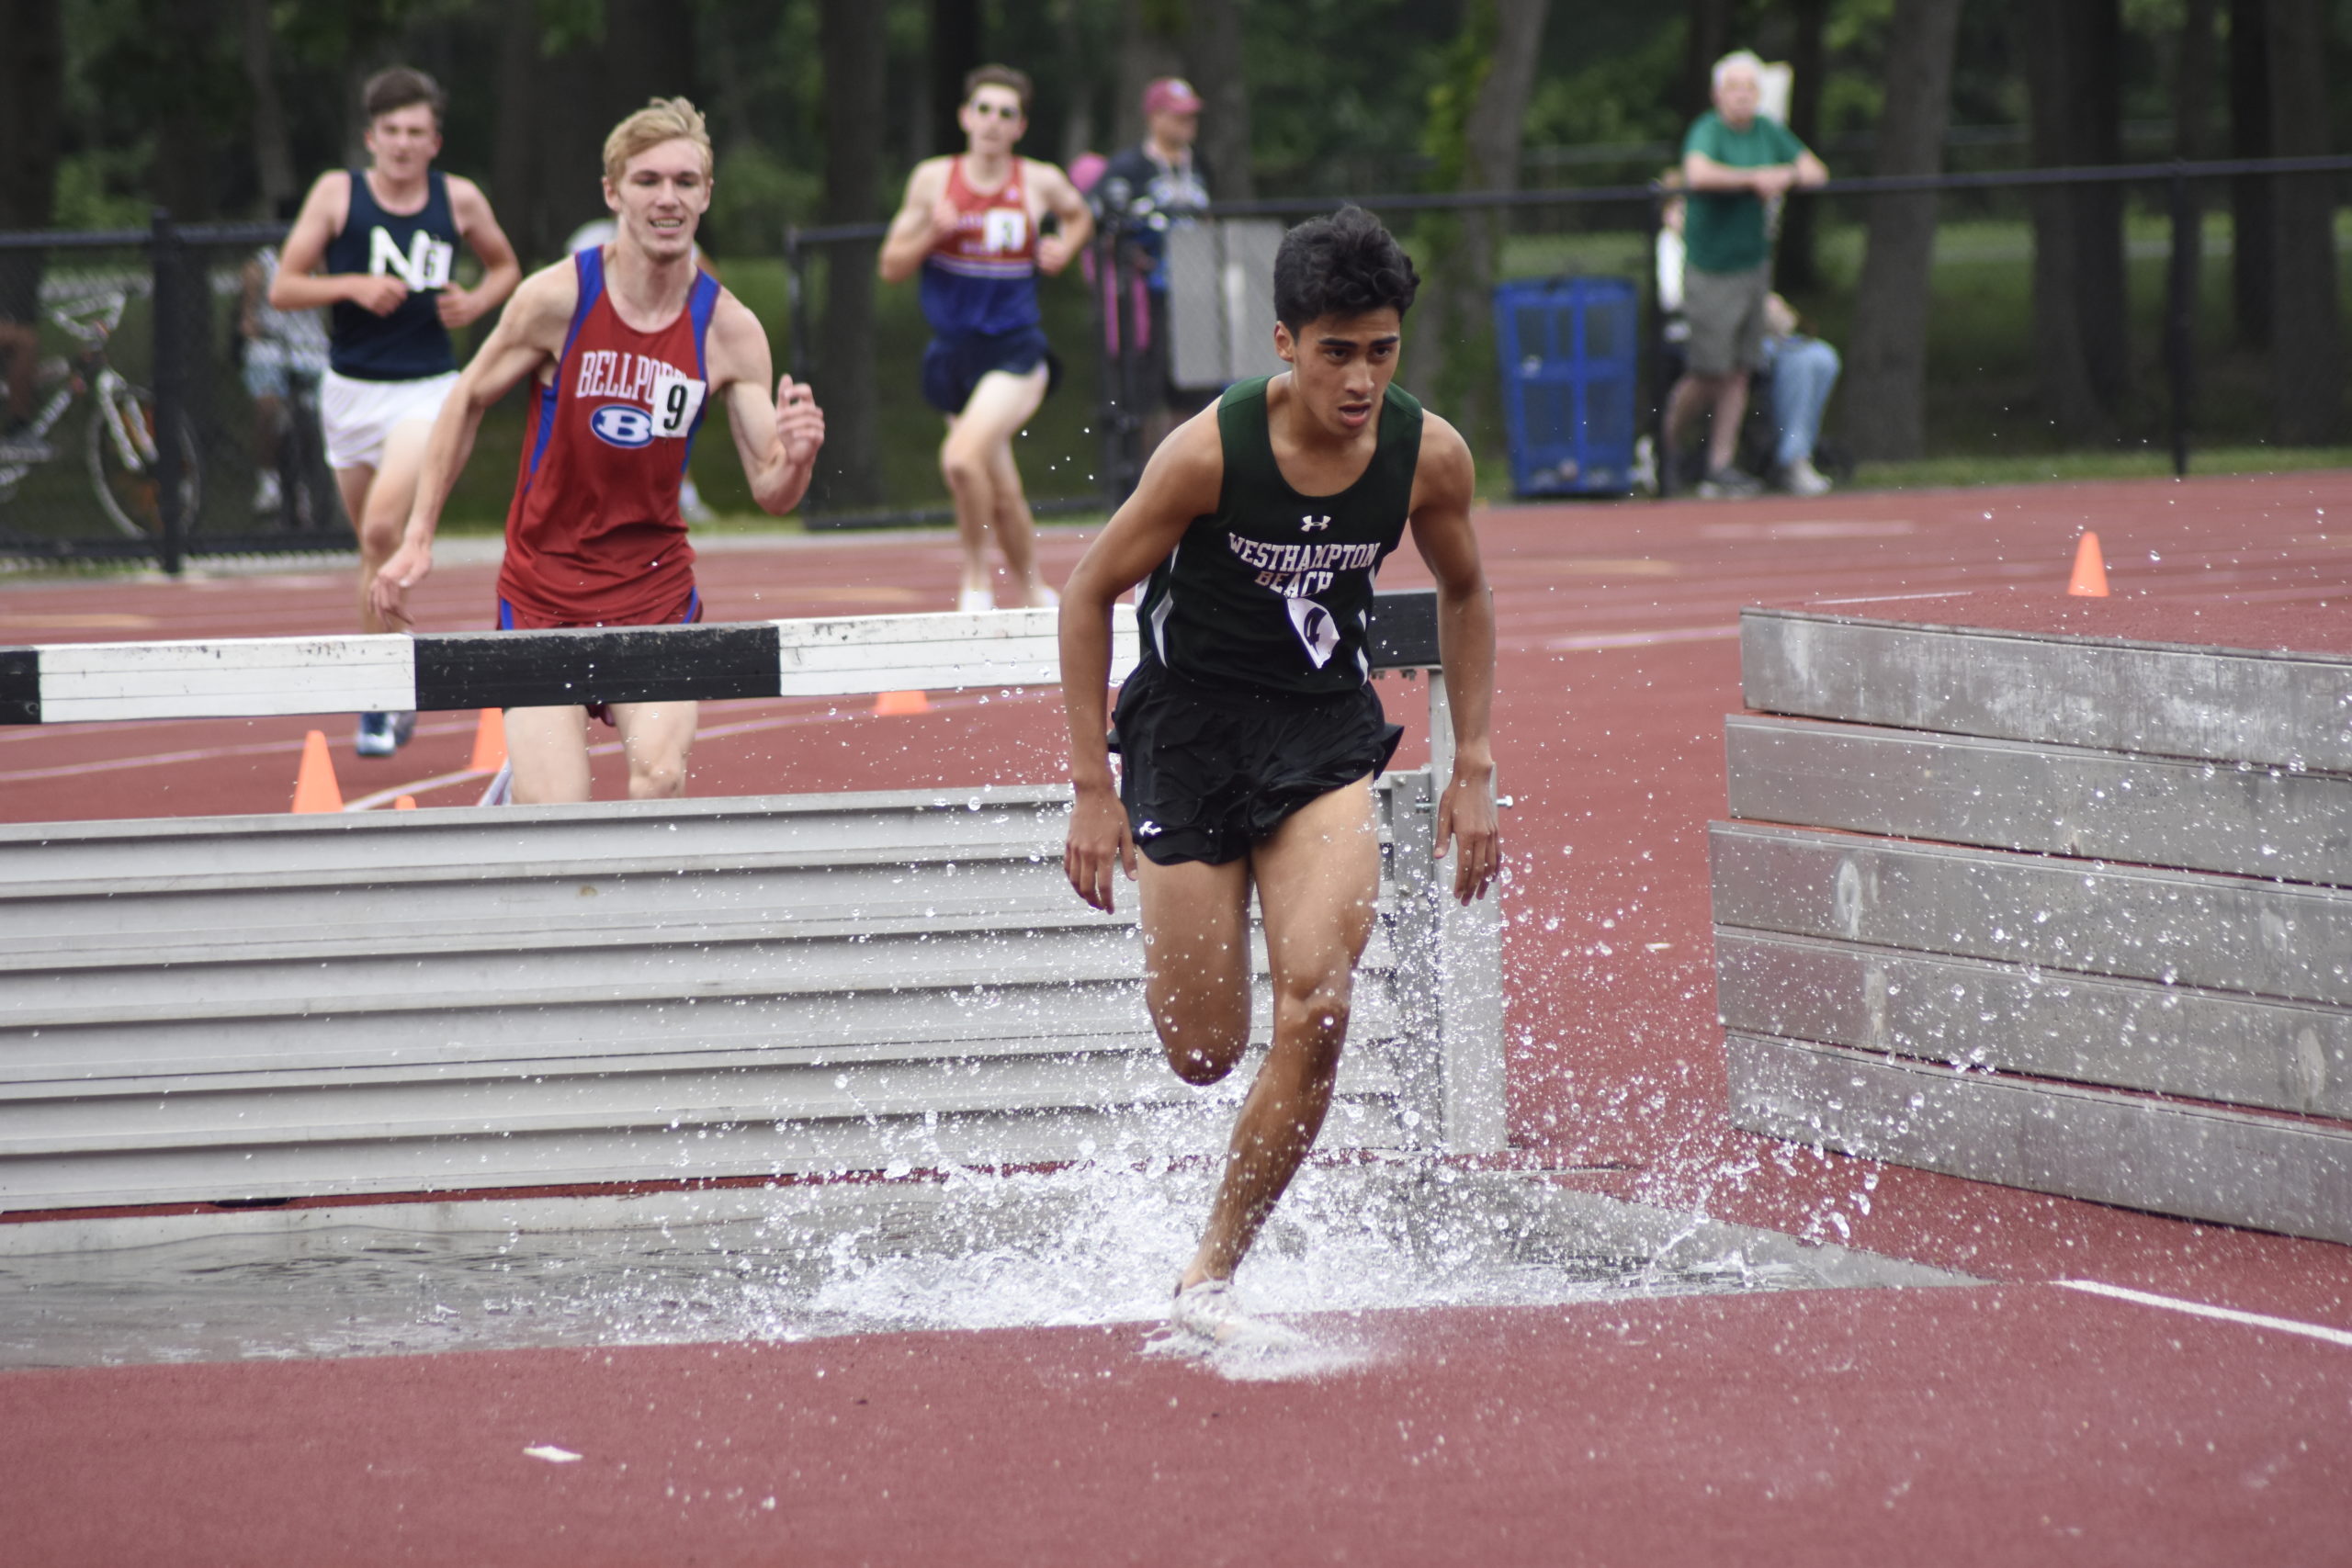 Junior Hurricane David Alvarado placed fourth in the 3,000-meter steeplechase earning All-County honors.